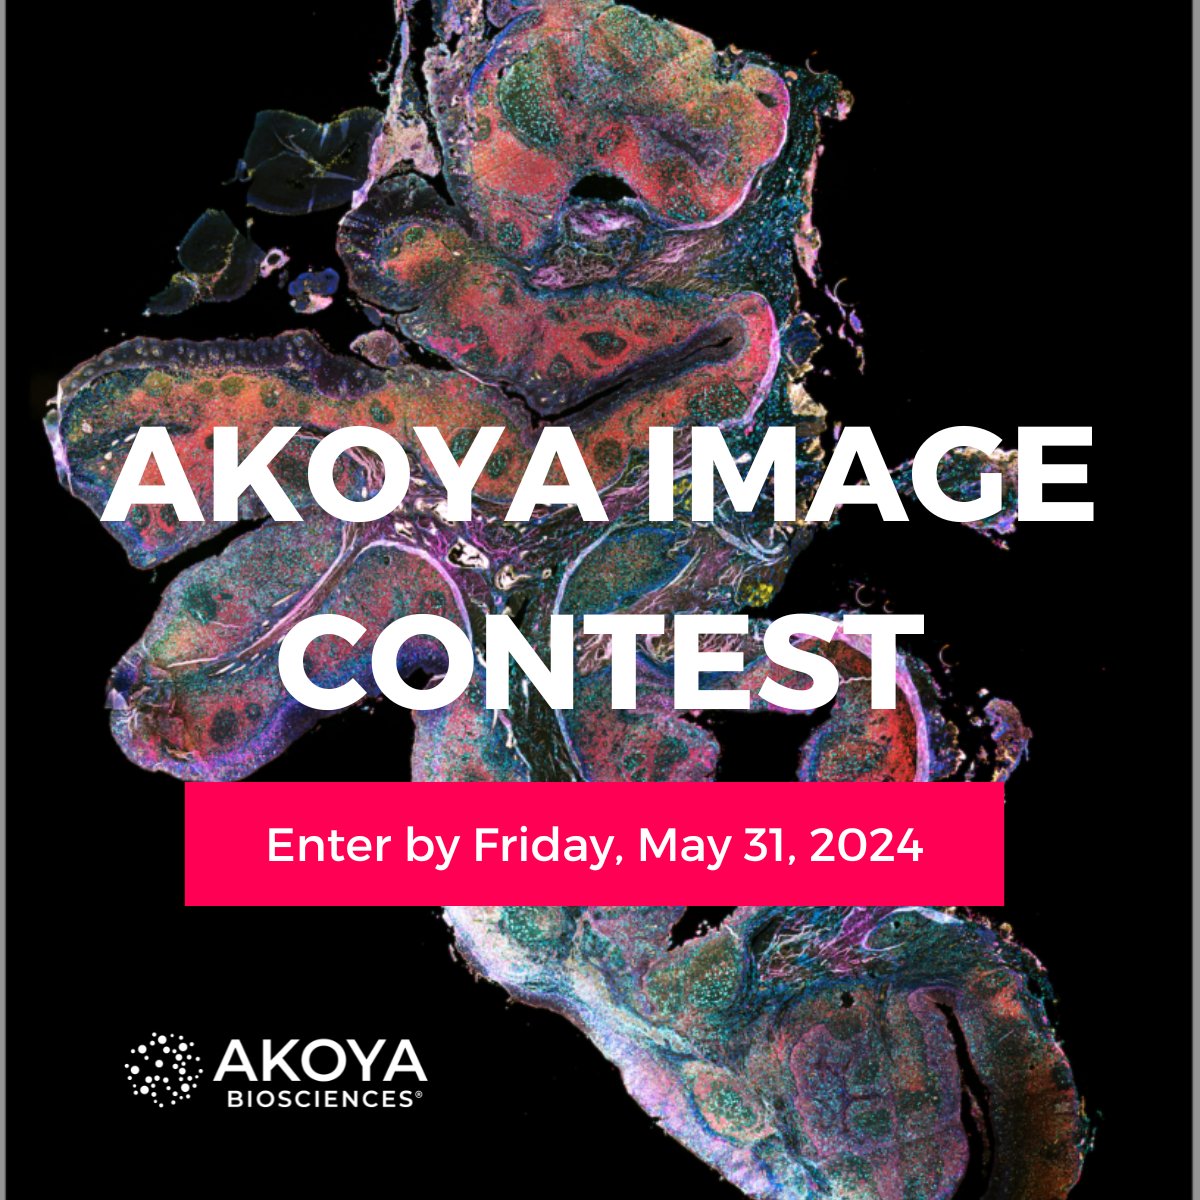 📸 Got an image that inspires? We're seeking captivating captures that showcase the artistry of #spatialbiology. Submit your mesmerizing tissue images using Akoya's technology for the chance to be featured on our platforms and a $100 Amazon gift card: bit.ly/3TfdR7x